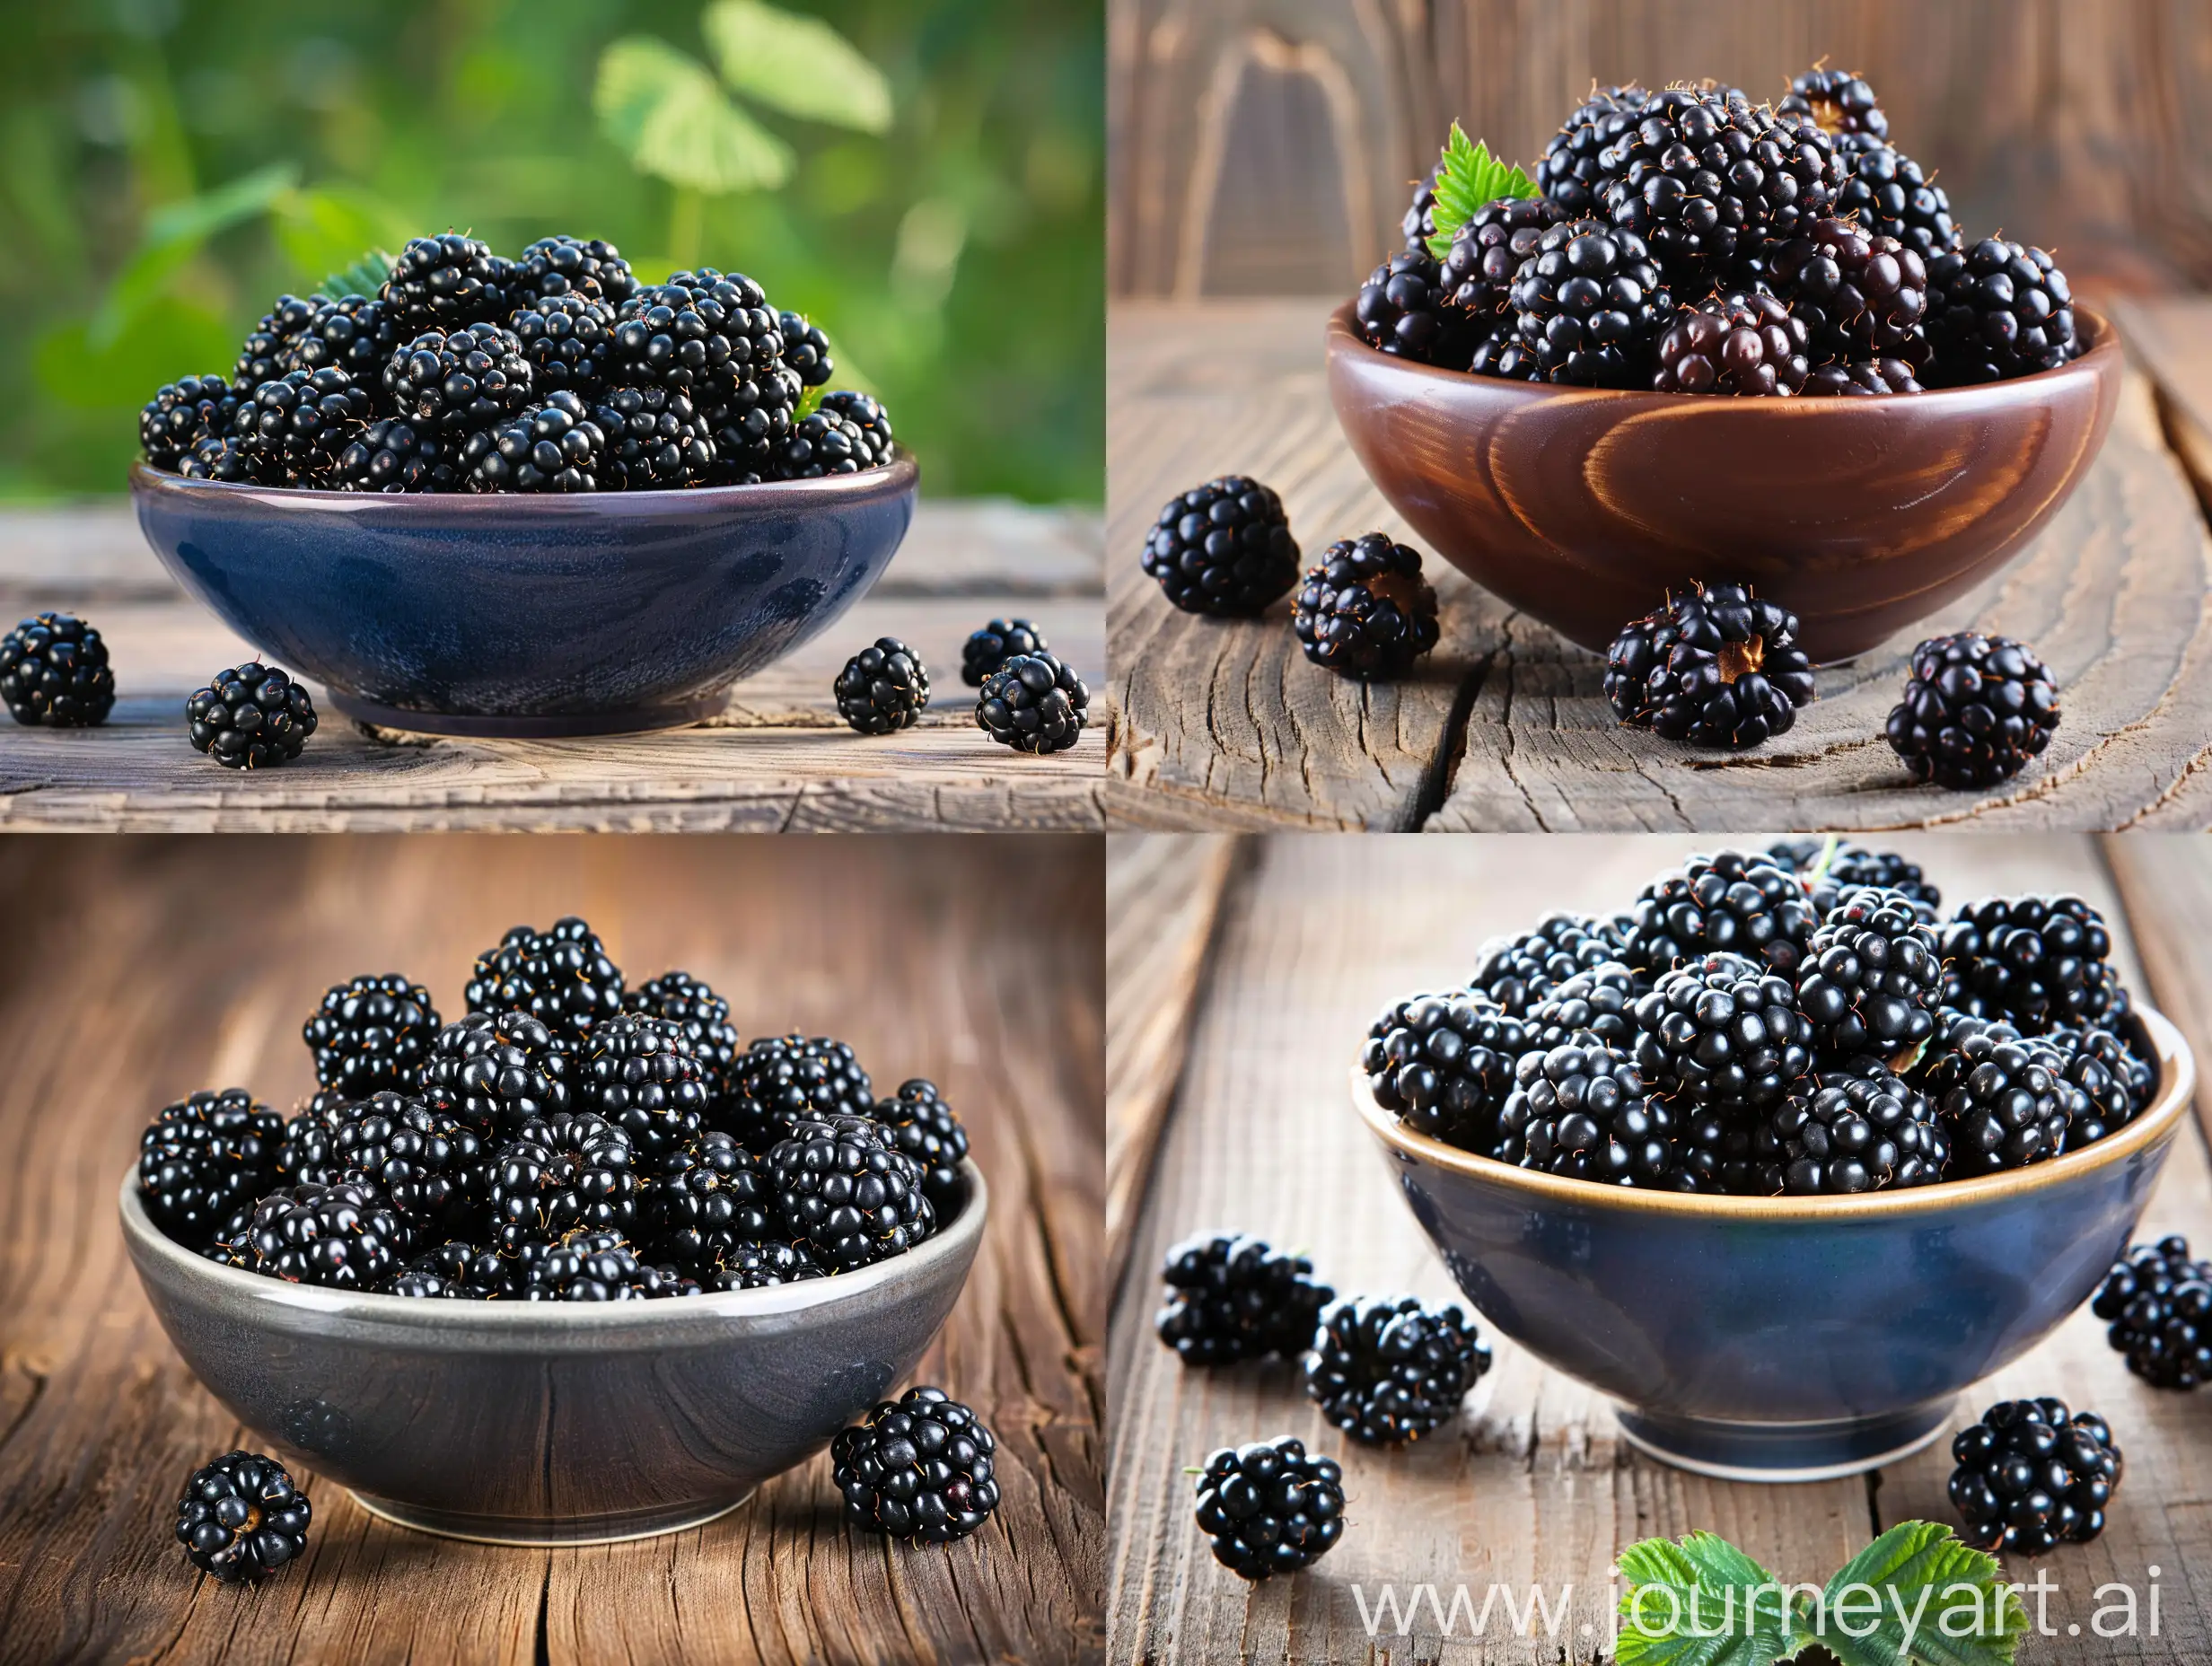 Real photo of a bowl full of blackberries on a wooden table